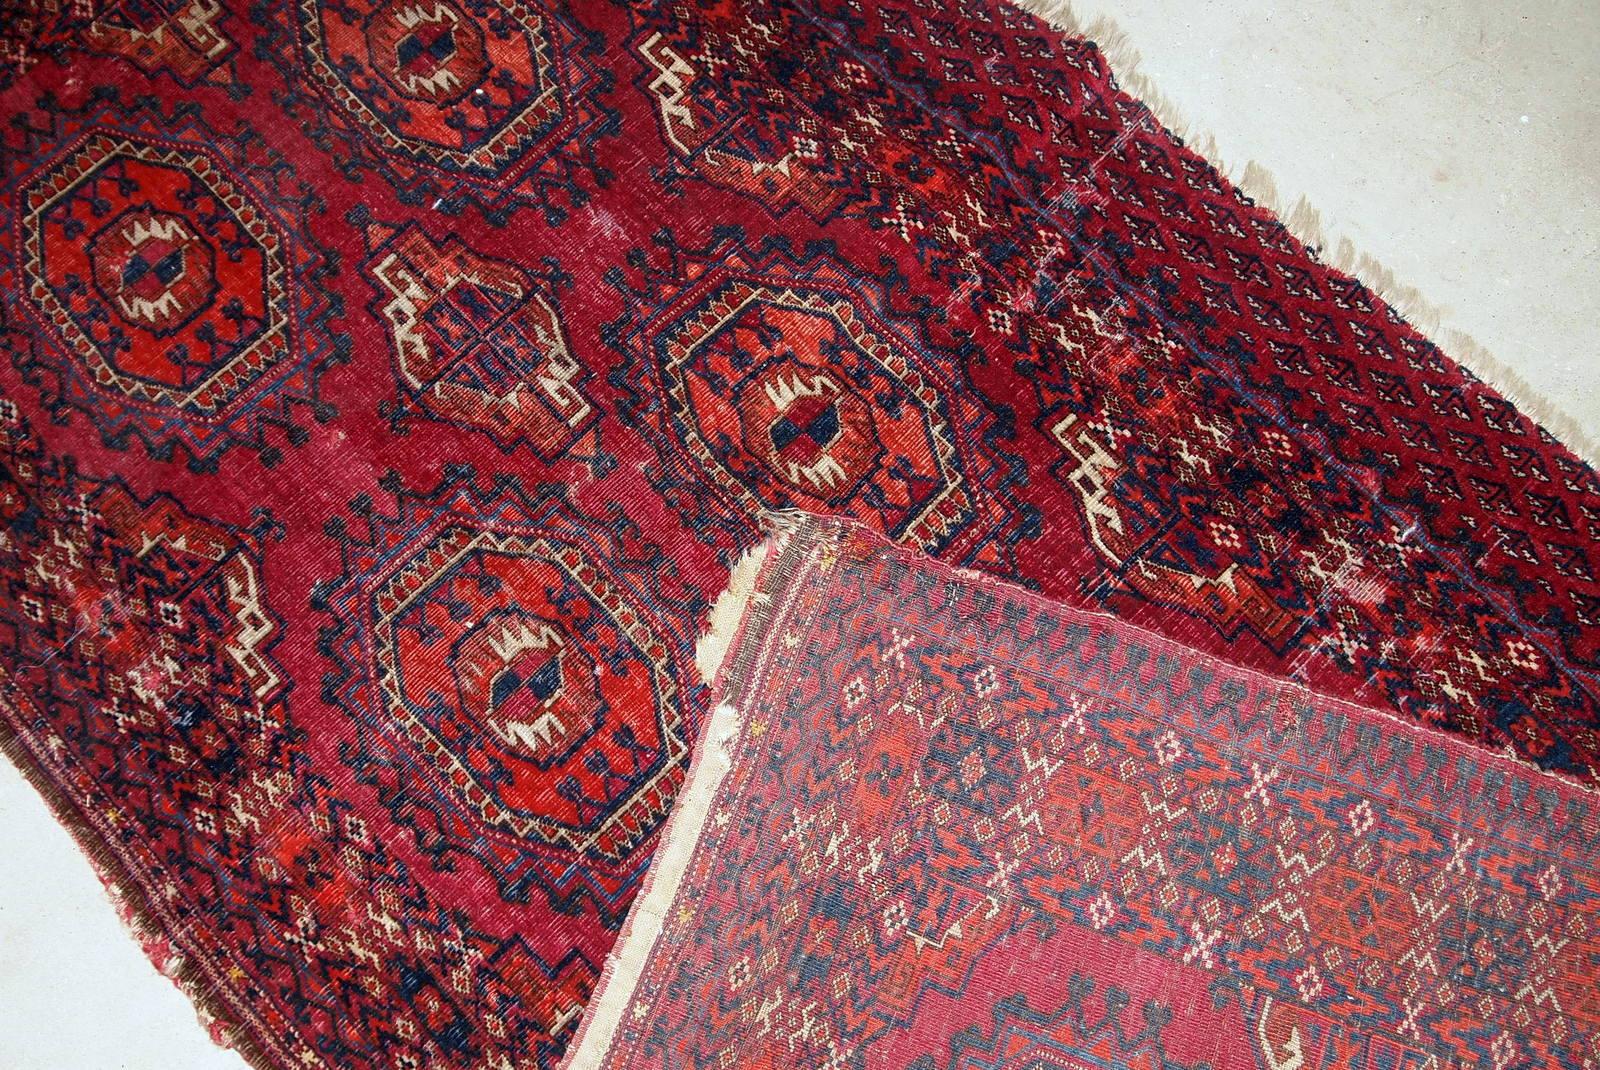 Handmade antique collectible Turkmen Saryk rug in scarlet shade. The rug is from the end of 19th century in original condition, it has some low pile and age wear.

- Condition: original, some low pile, age wear,

- circa 1880s

- Size: 2.6' x